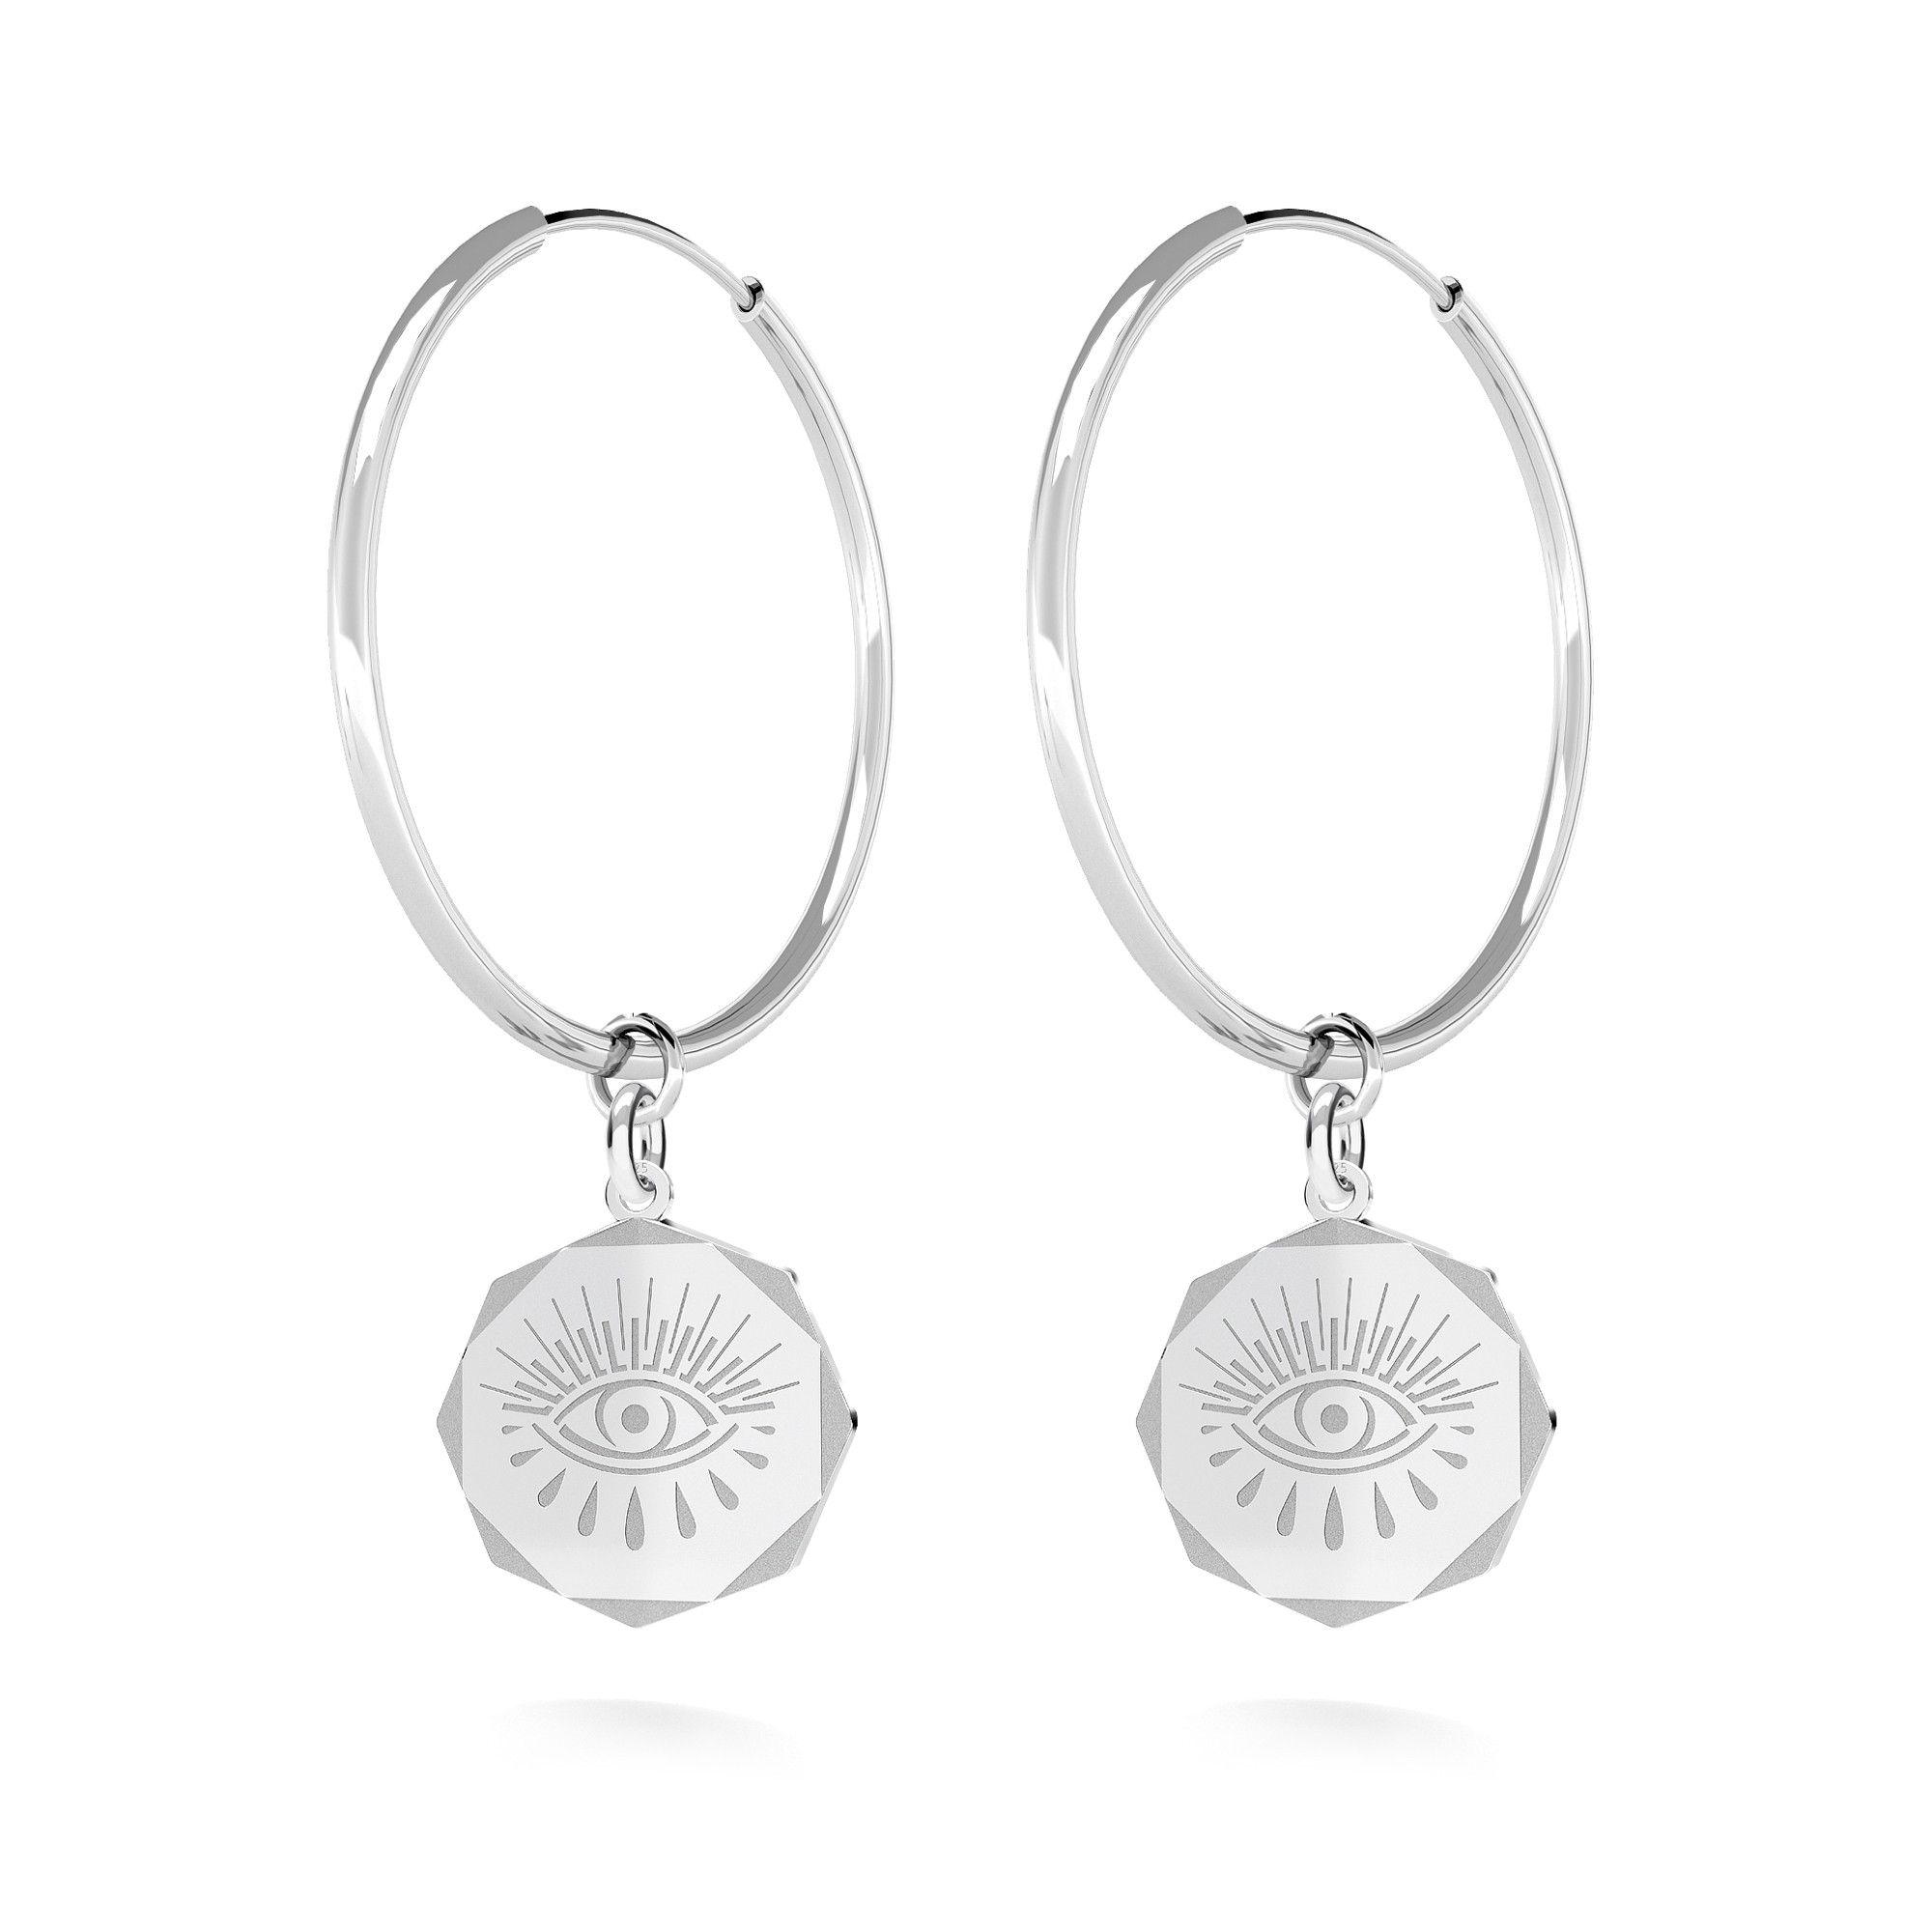 Hoop earring with letter, T°ra'vel'' sterling silver 925